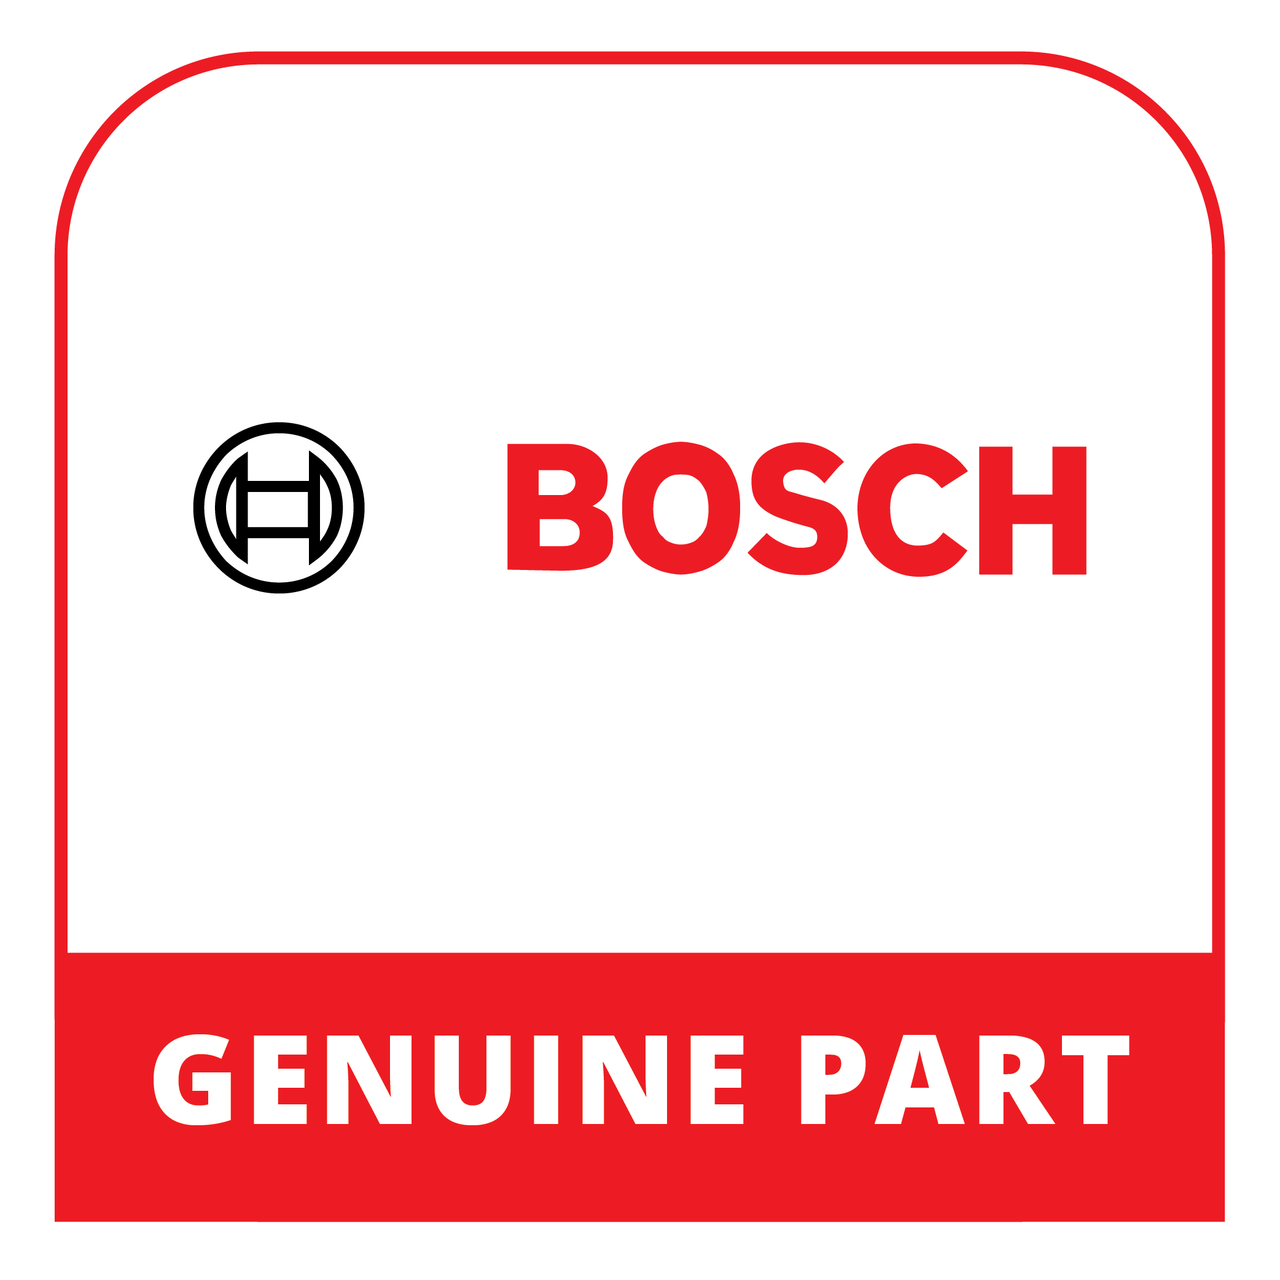 Bosch (Thermador) 20001932 - Glass Front Panel - Genuine Bosch (Thermador) Part